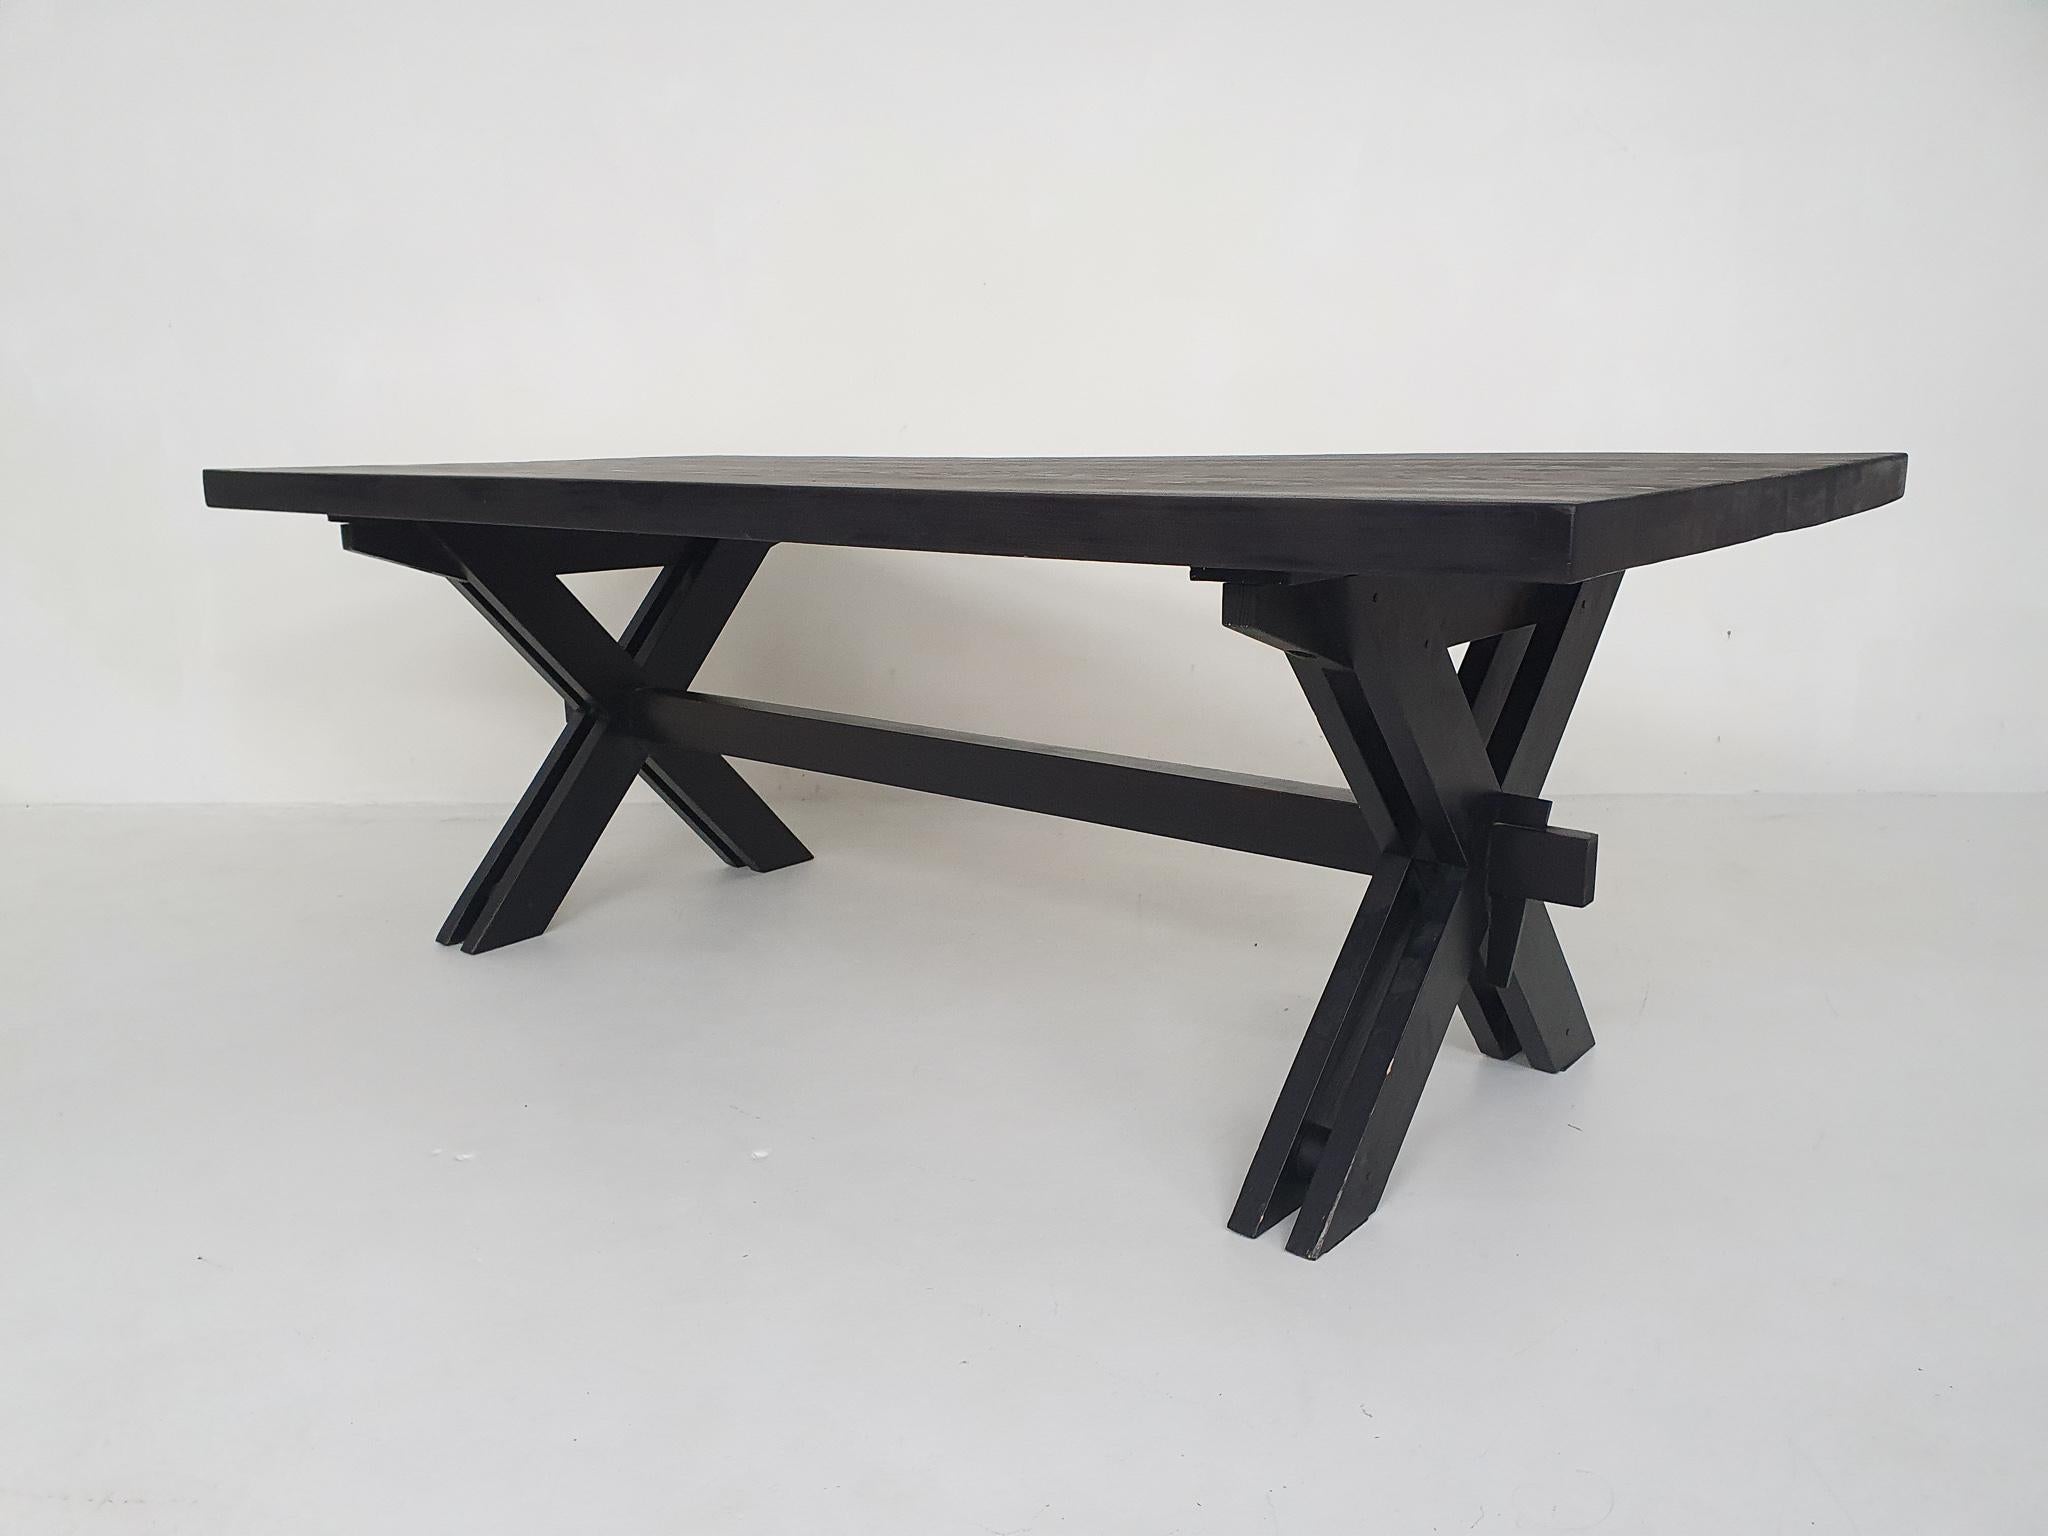 Large black laquered wooden table (probably pinewood). This table was desgined by an (unknown) architect for a villa in Germany in the 1970's. The table was custom made by Johannes Blesgen.
The table has a nice crossed legs frame, and a very heavy